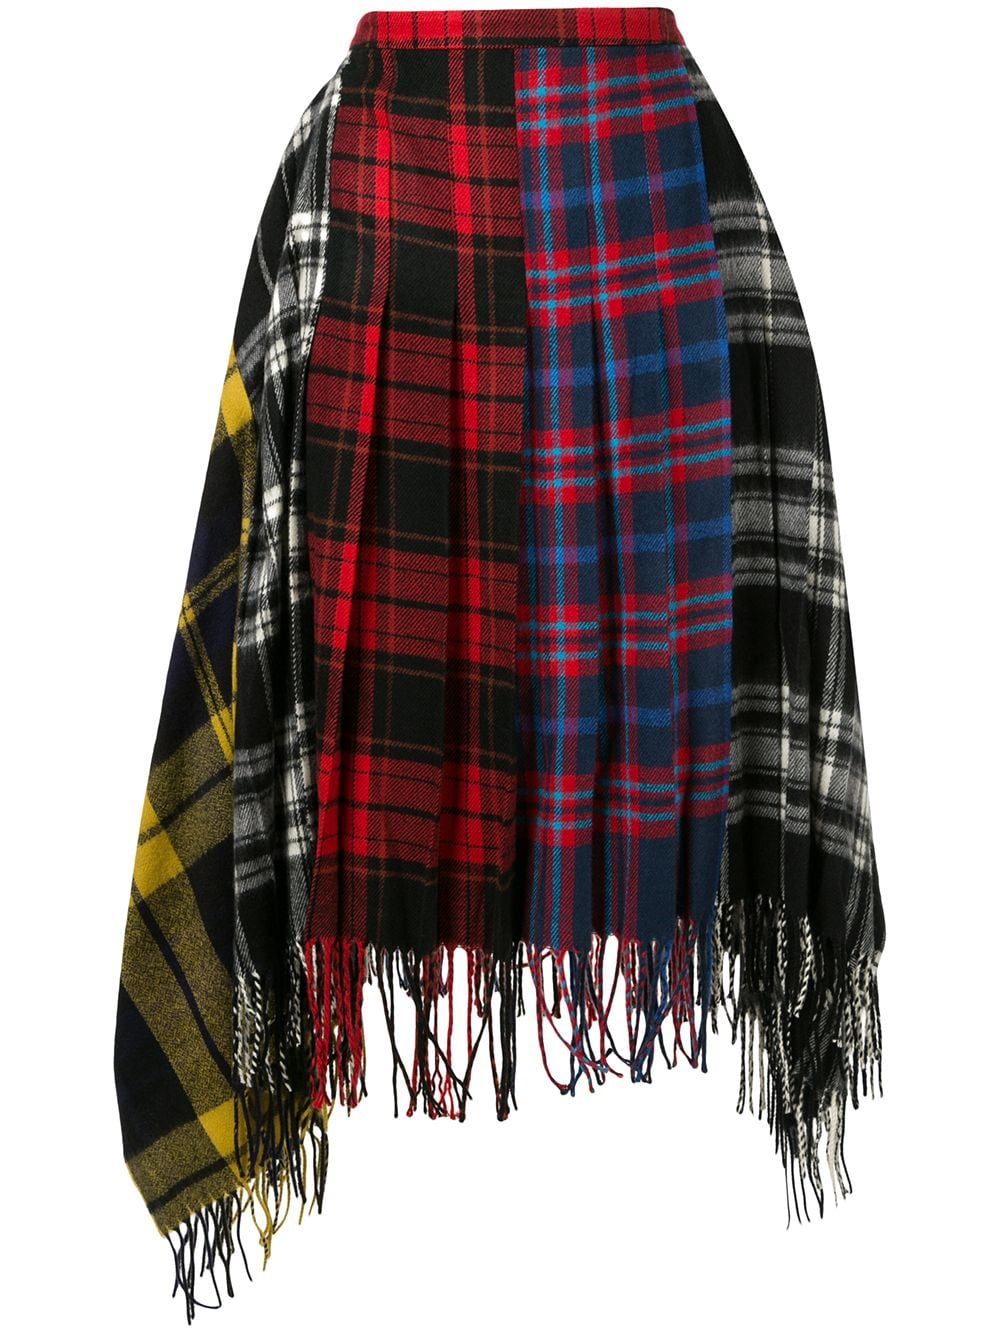 Plaid Skirts: Adding a Touch of Sophistication to Your Wardrobe